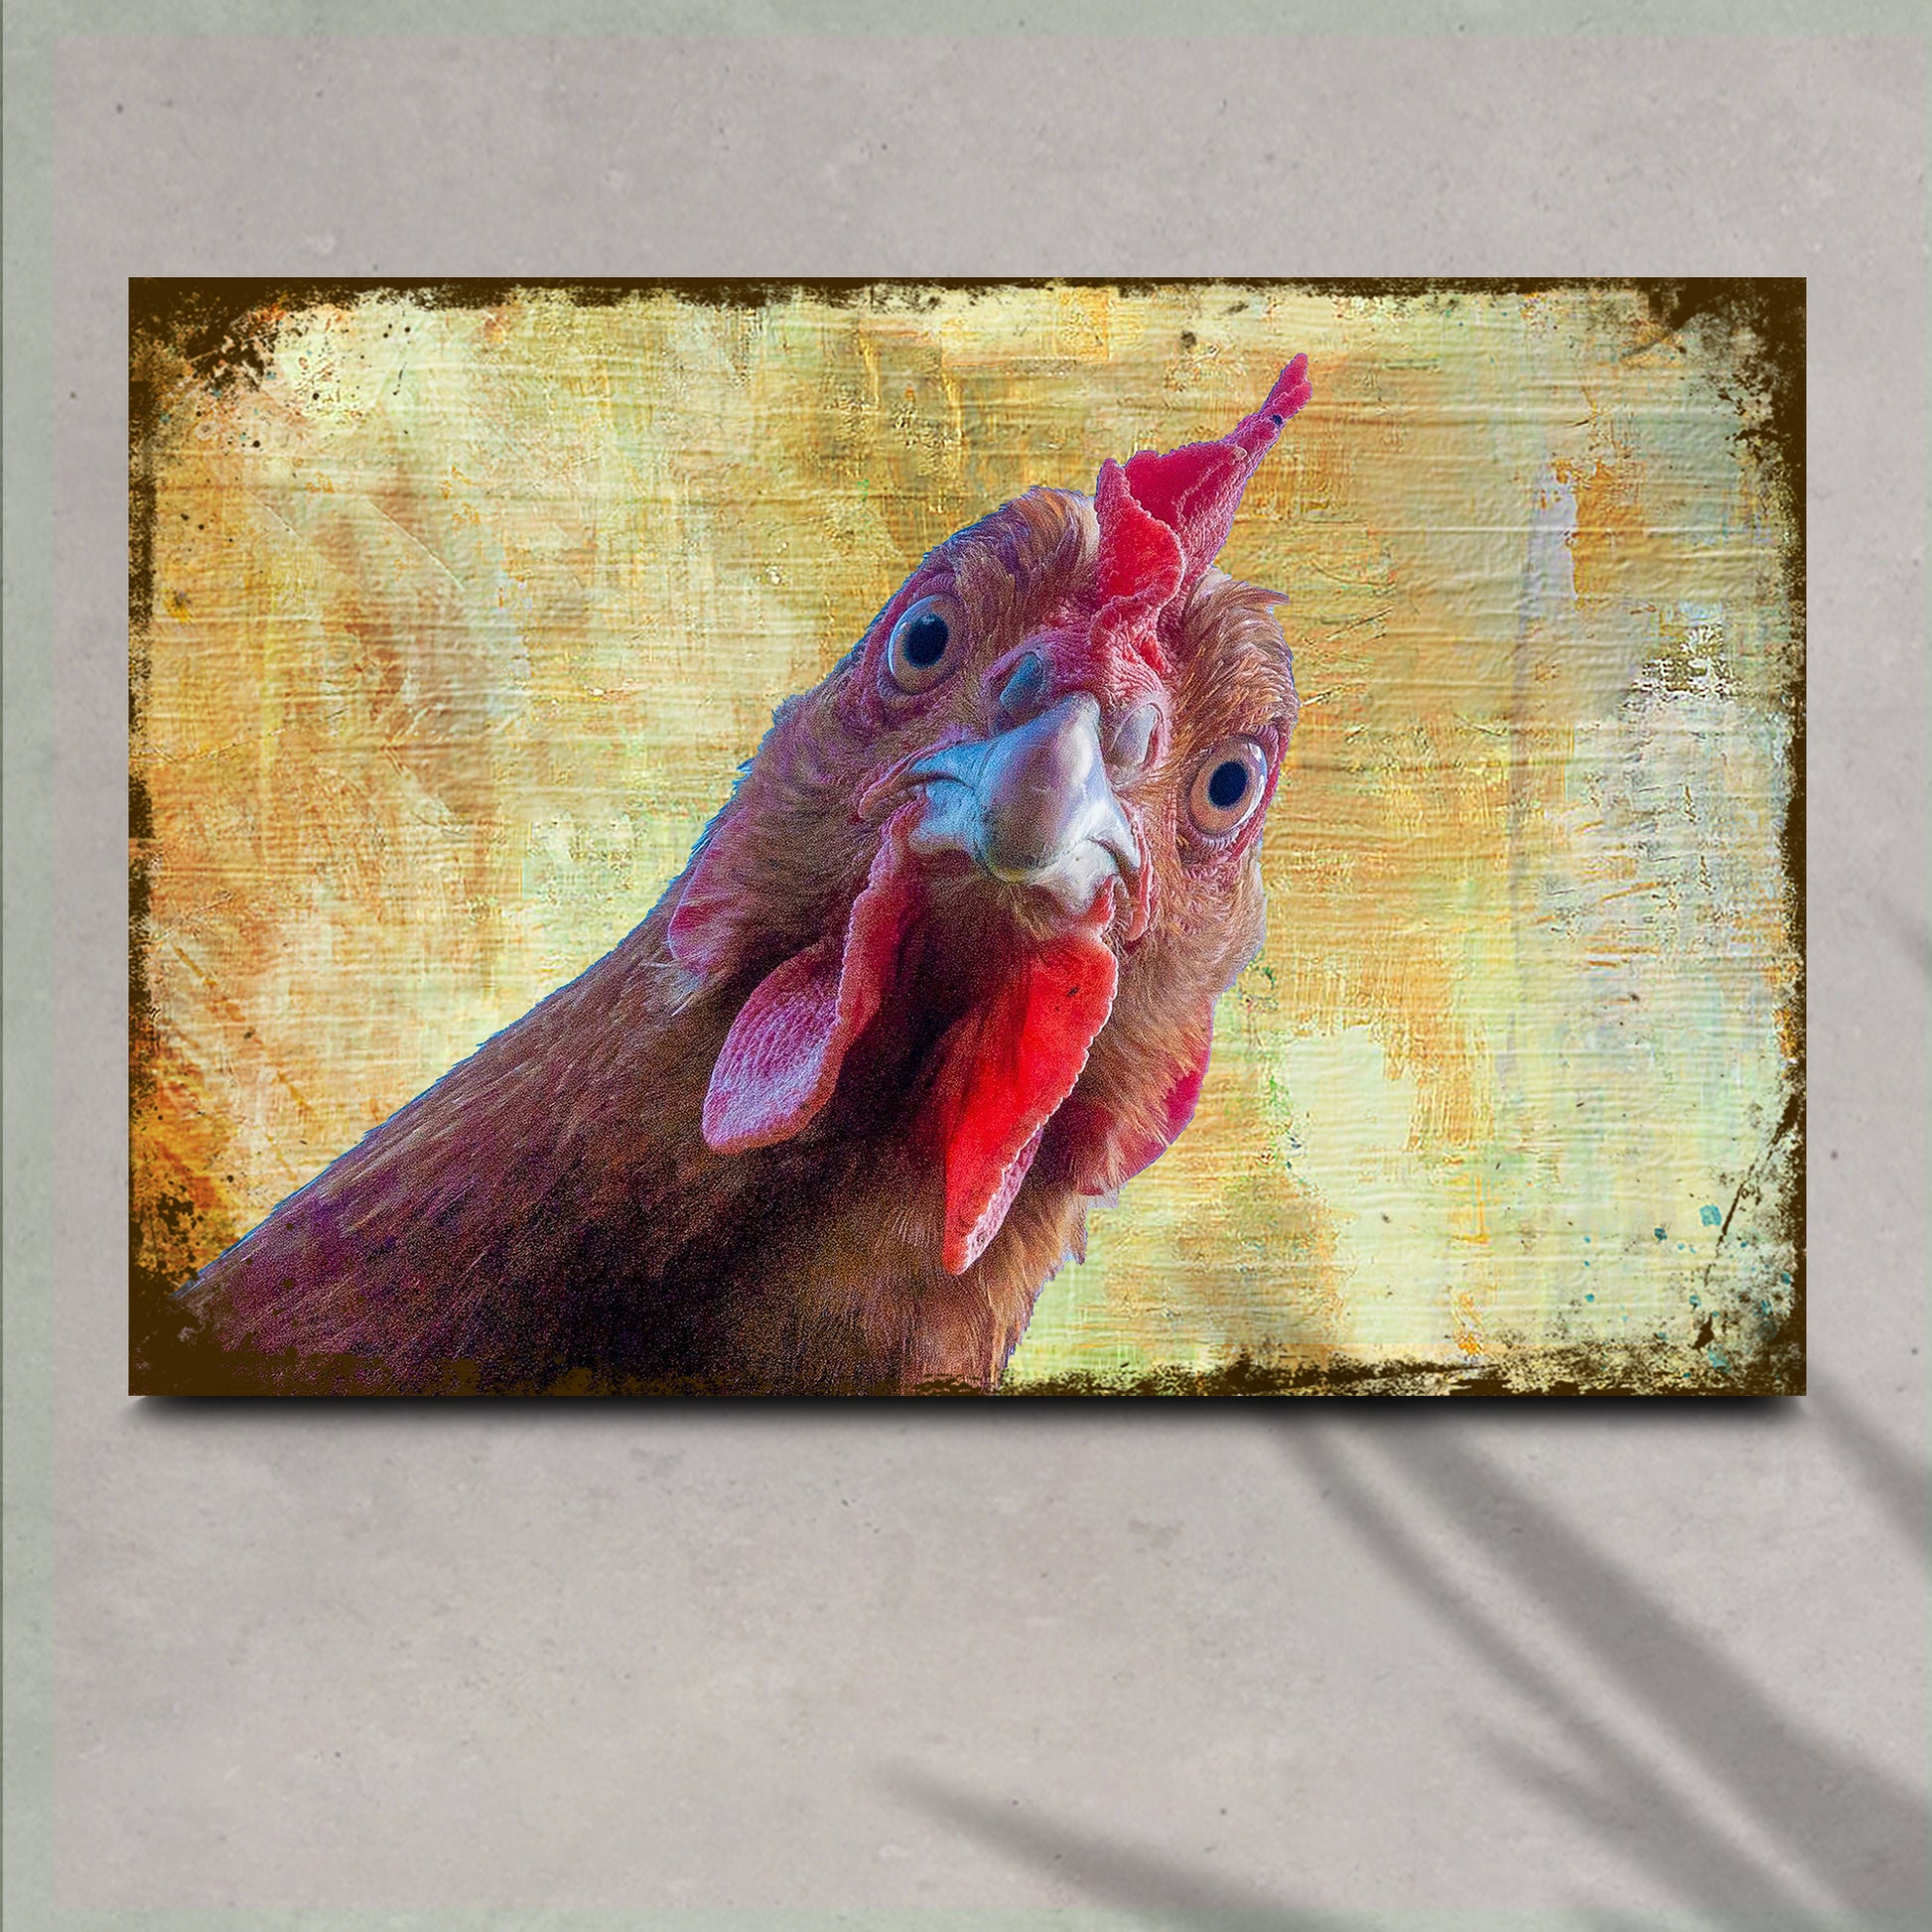 Curious Chicken Canvas Wall Art - Image by Tailored Canvases